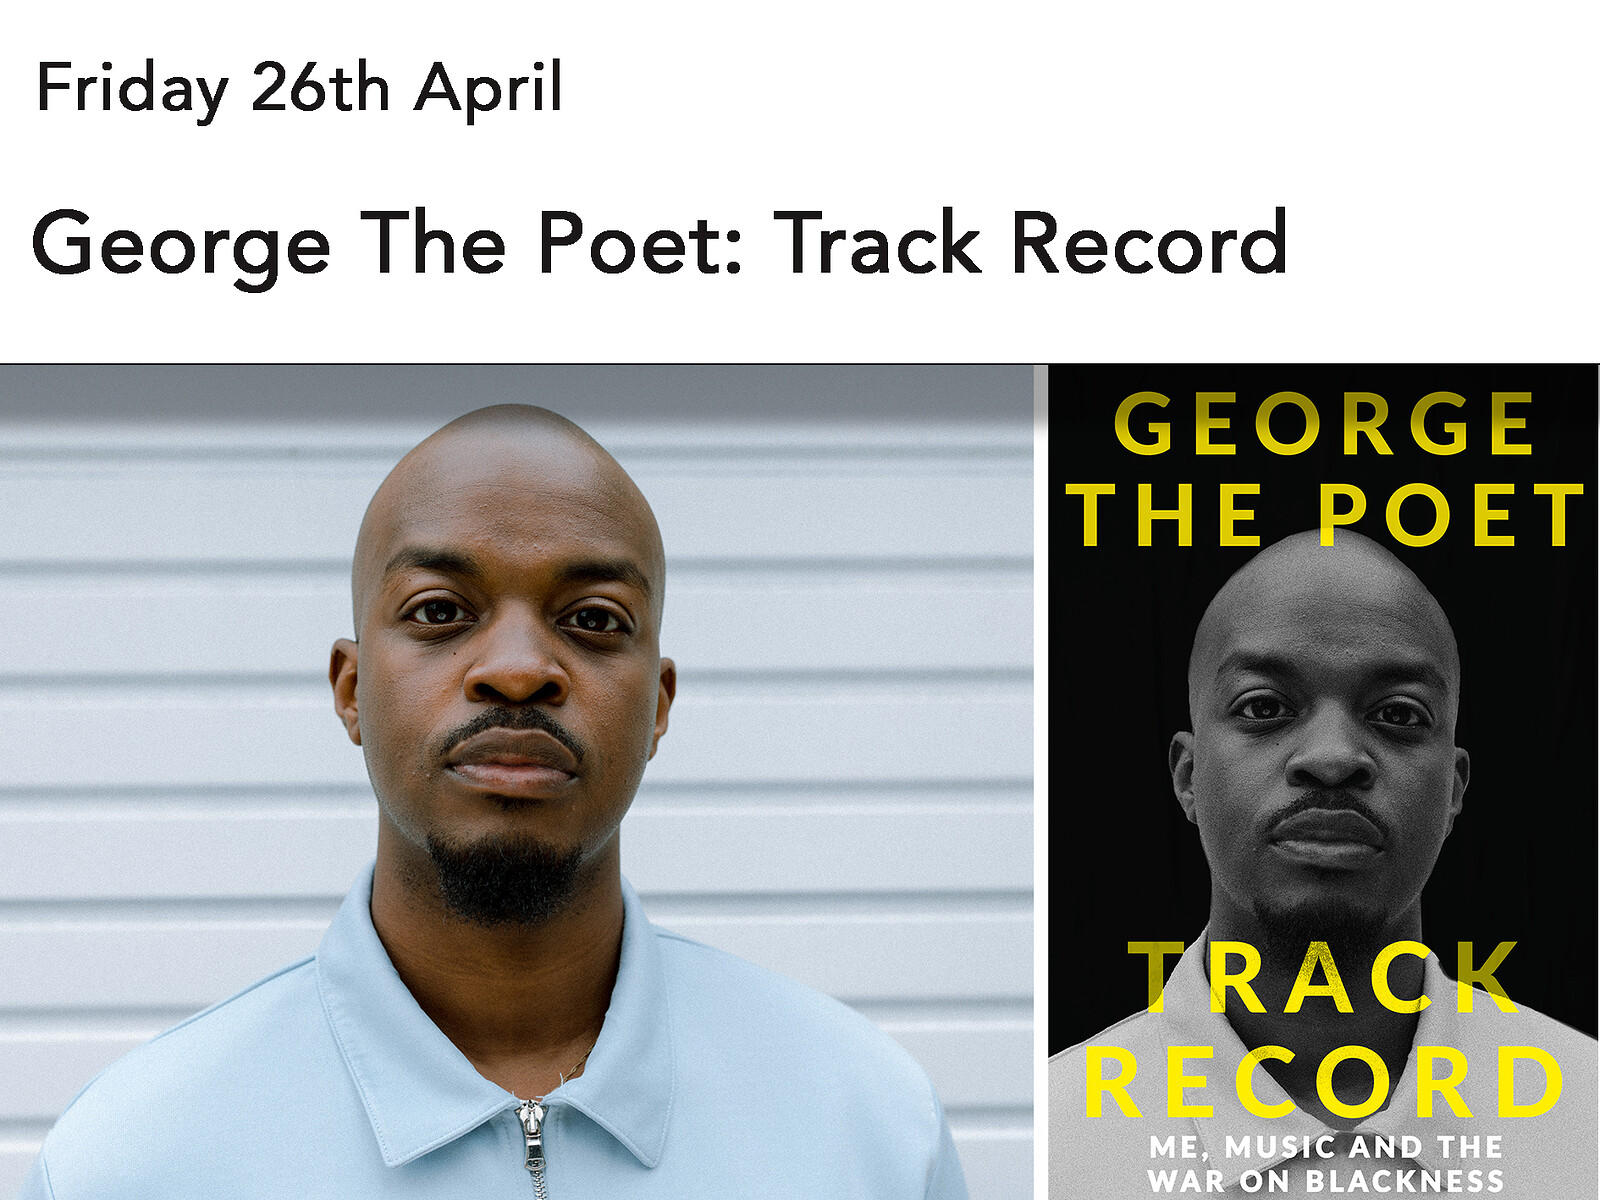 George The Poet: Track Record at 1532 Performing Arts Centre